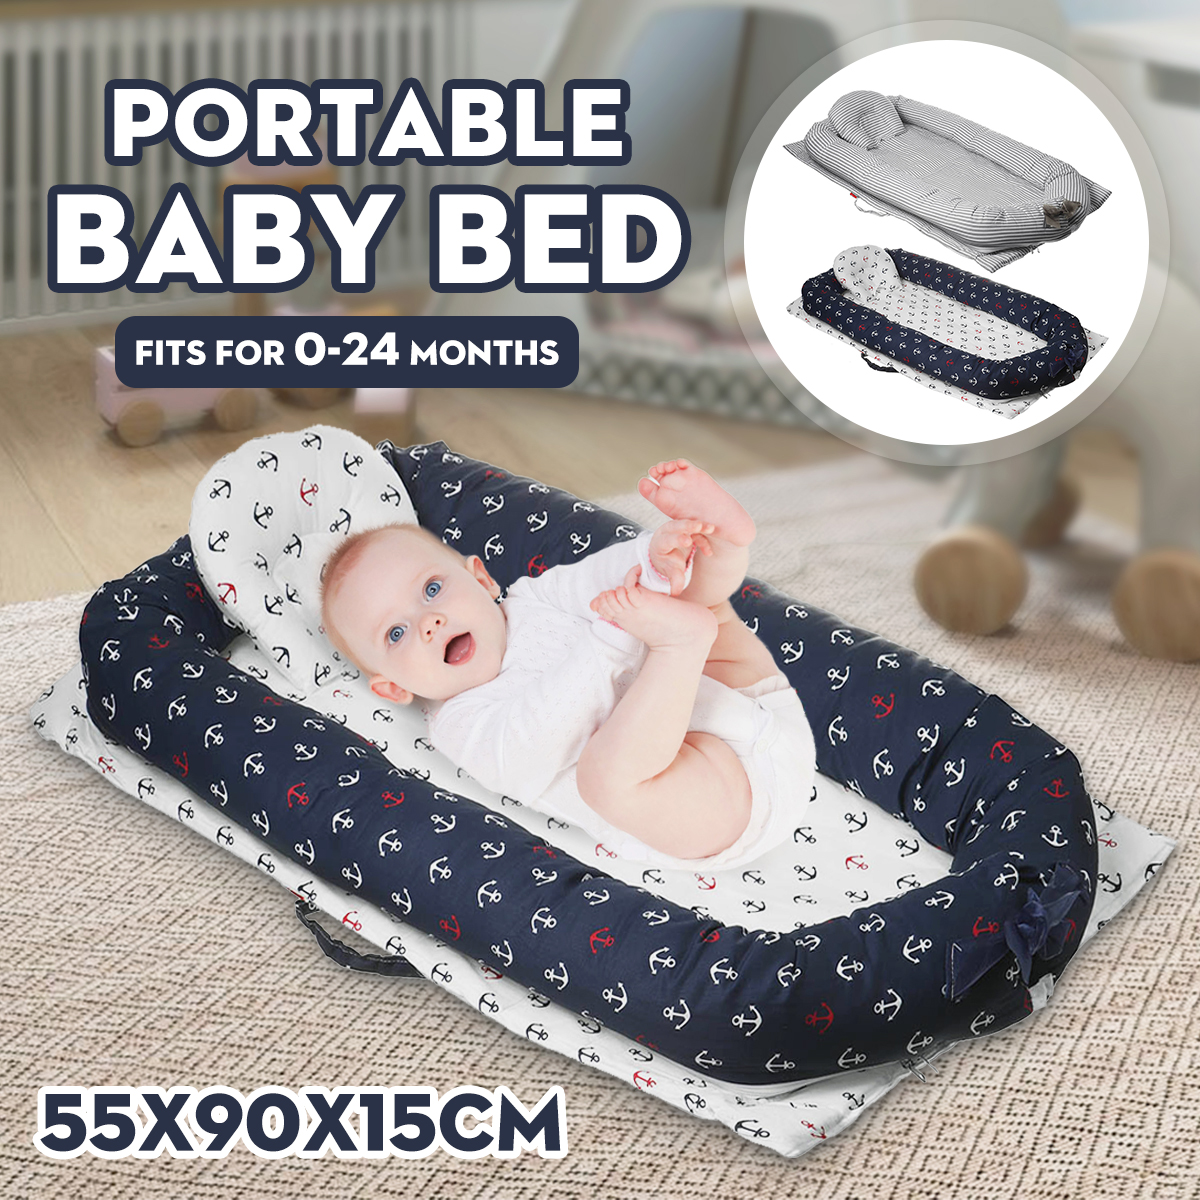 Folding-Baby-Bed-Portable-Kids-Sleeping-Basket-Portable-Infant-Sleeper-with-Bumper-Travel-1810330-1